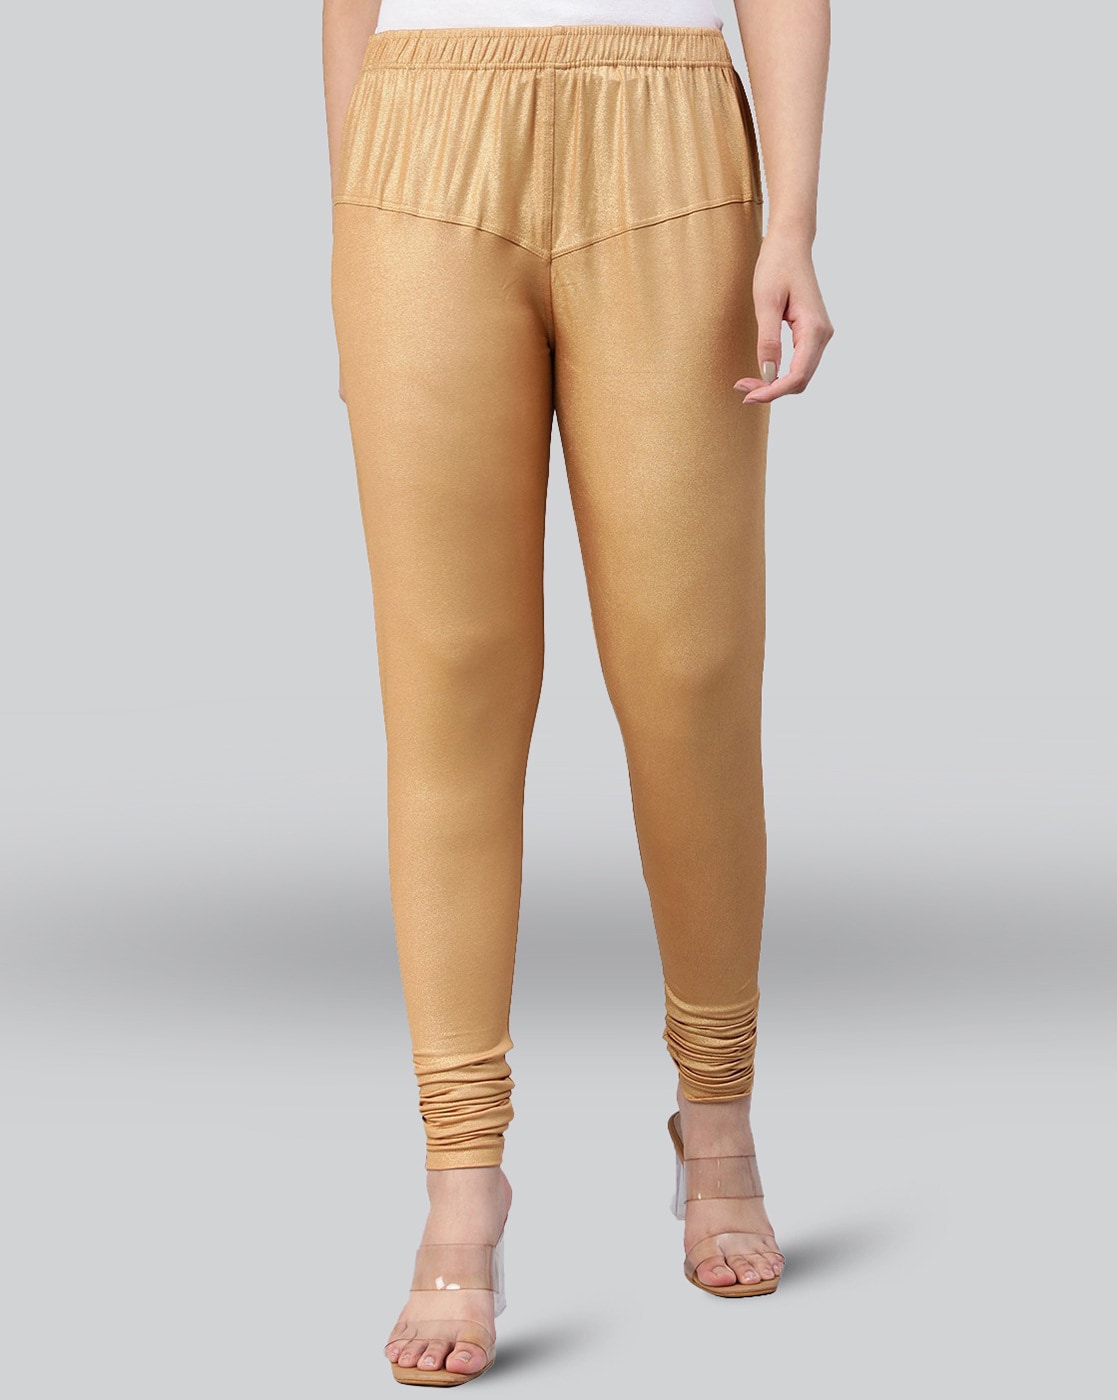 LUX Lyra Cotton Stretchable Full length Churidar Lycra Leggings for women -  Rich Gold - Frozentags - Ladies Dress Materials